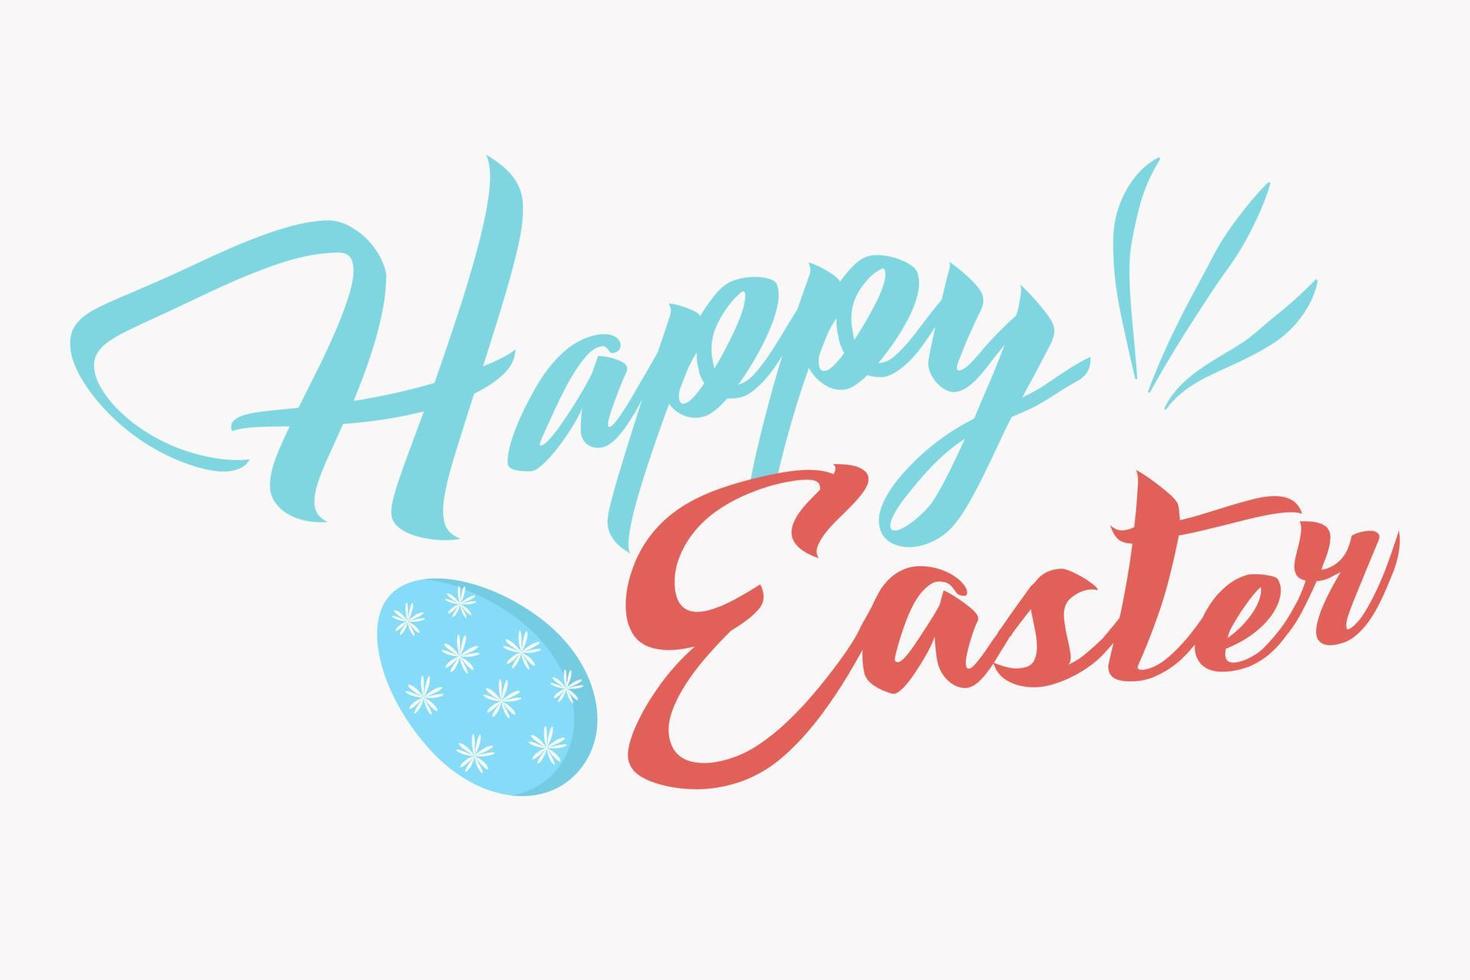 Happy Easter lettering with easter egg, calligraphy inscription. vector